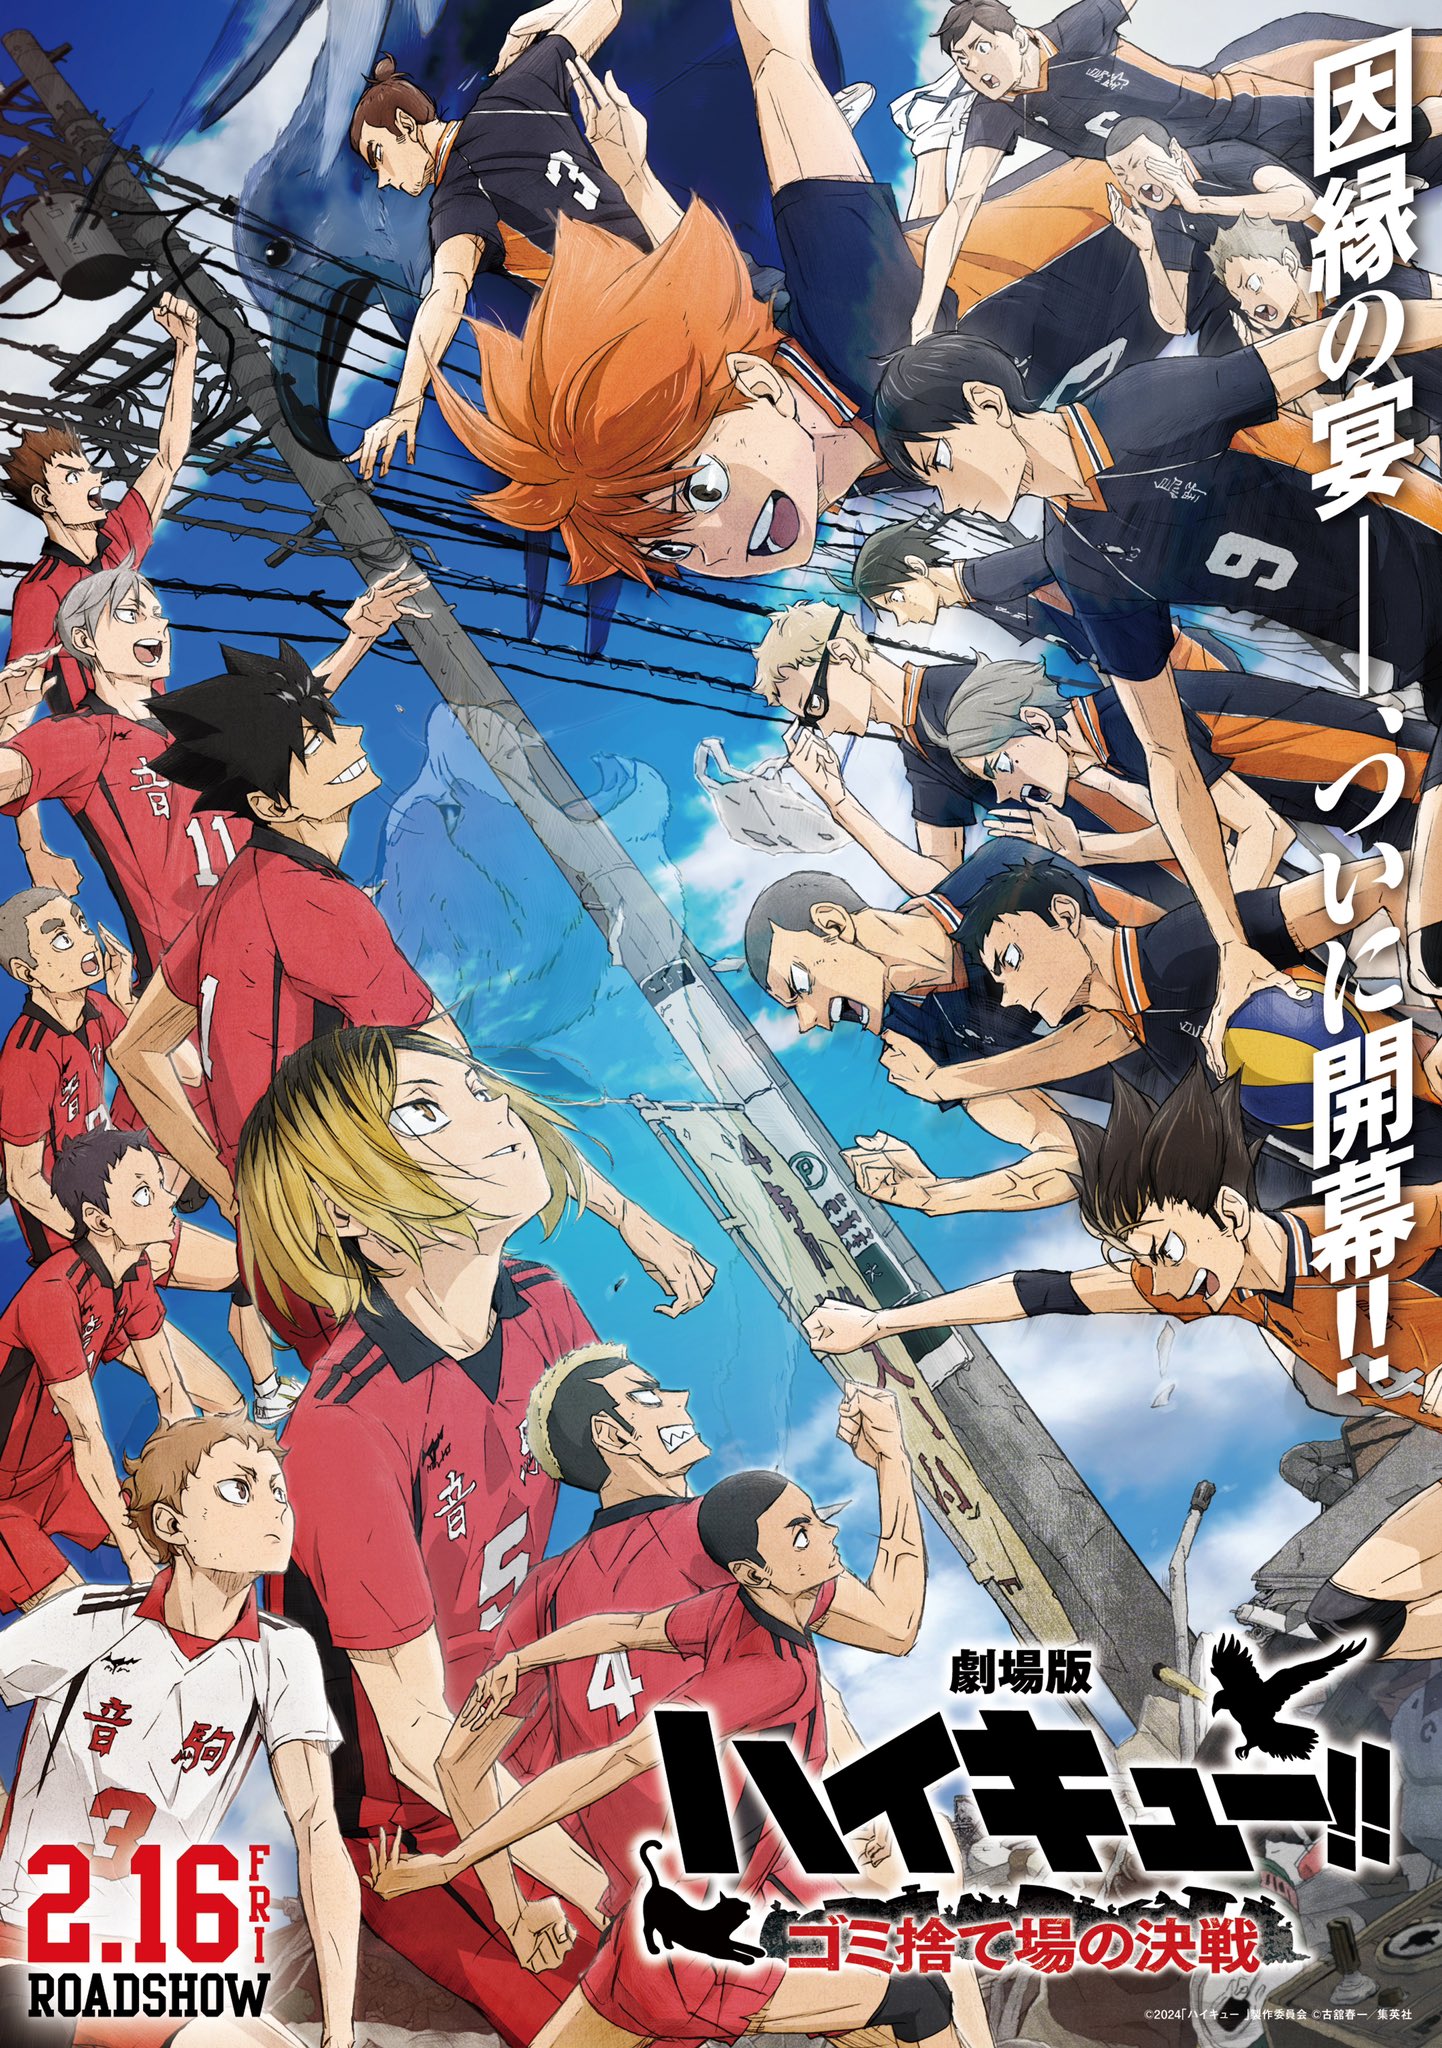 Movie Haikyuu Tran decides to decide on the final story